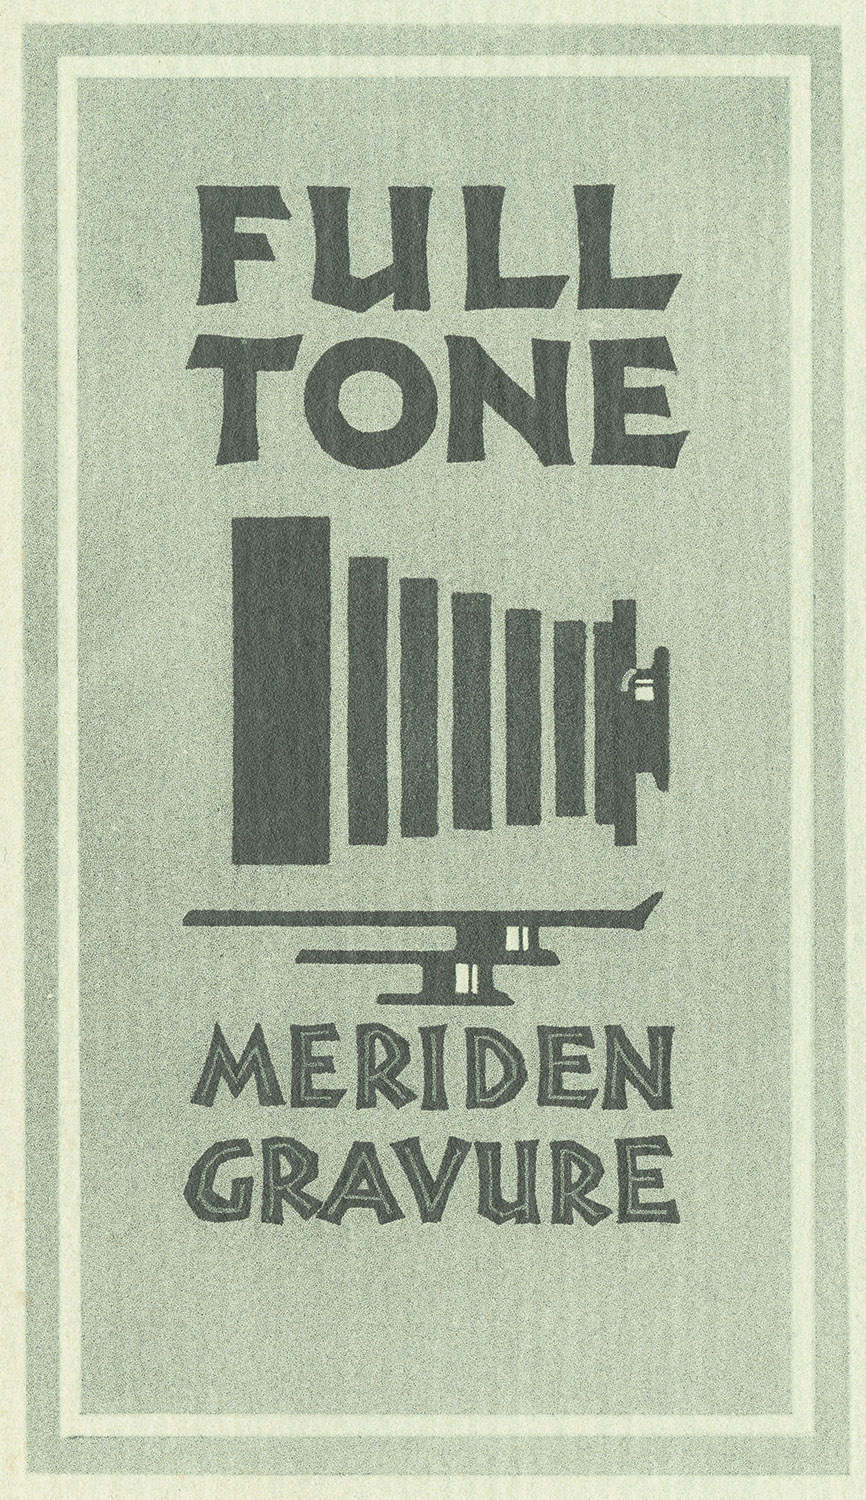  Logo used by the Meriden Gravure Company in the 1930s. 